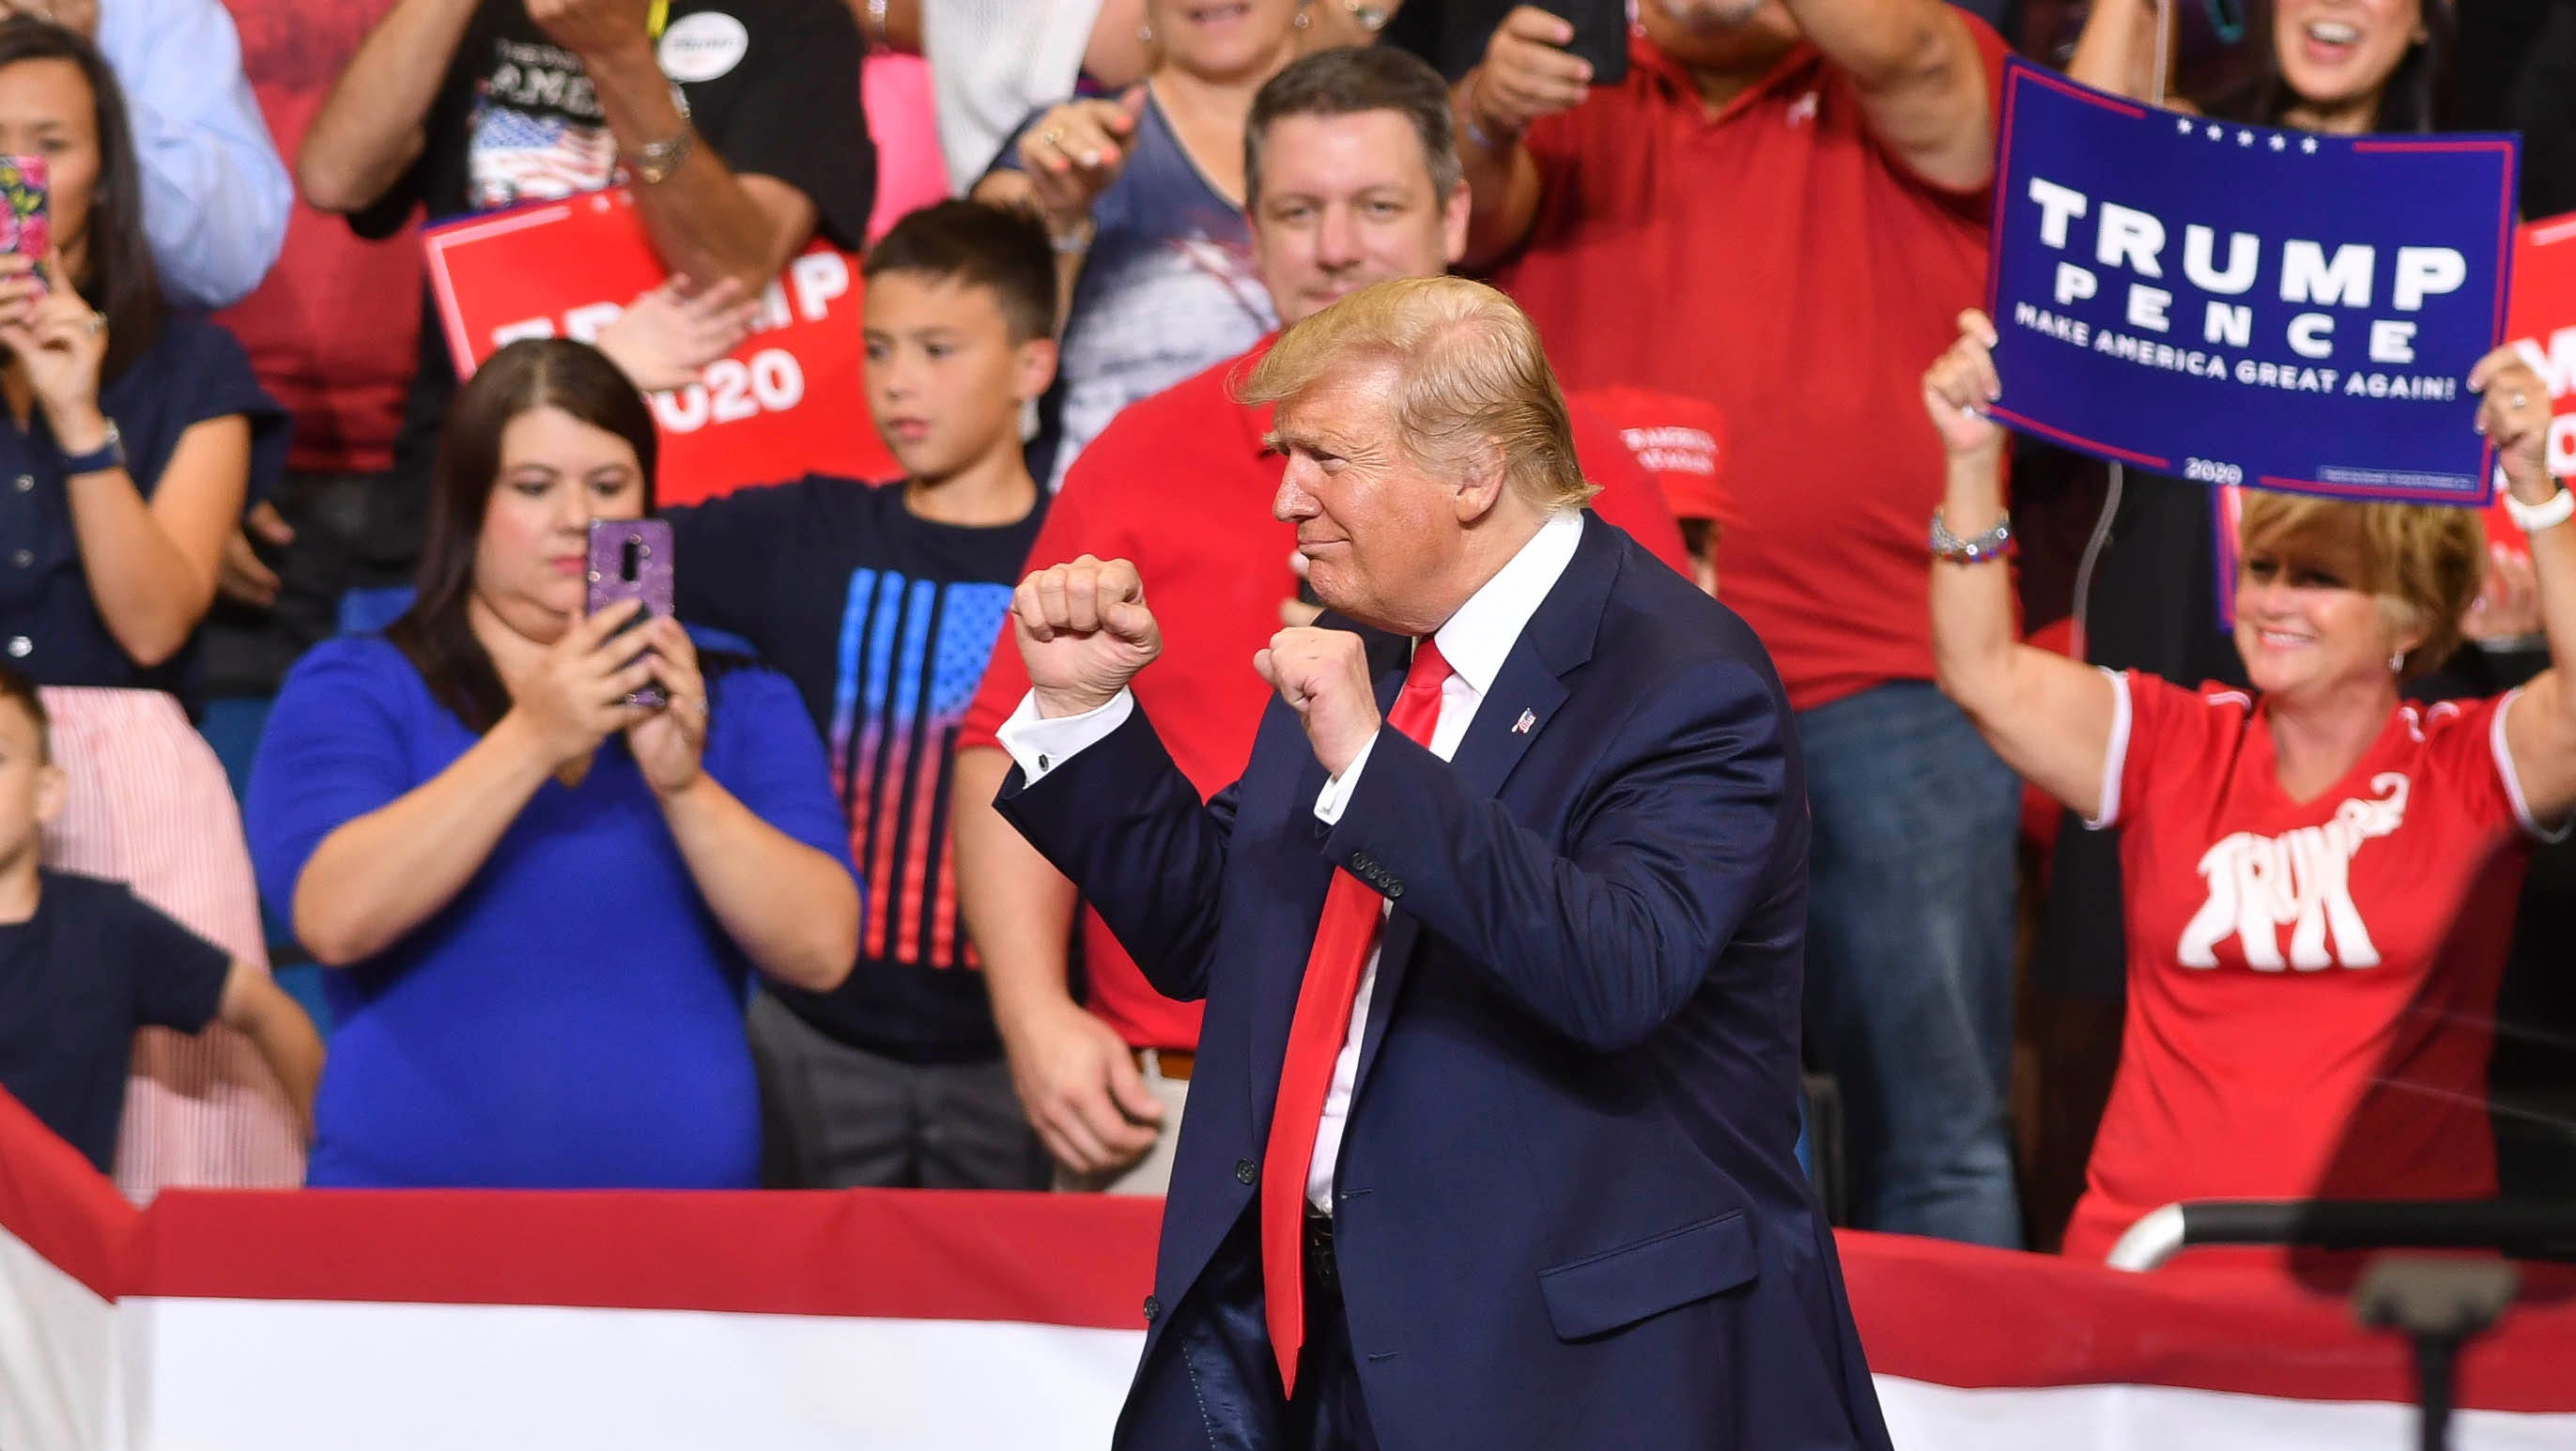 Trump reelection fundraising tops 24 million in 24 hours